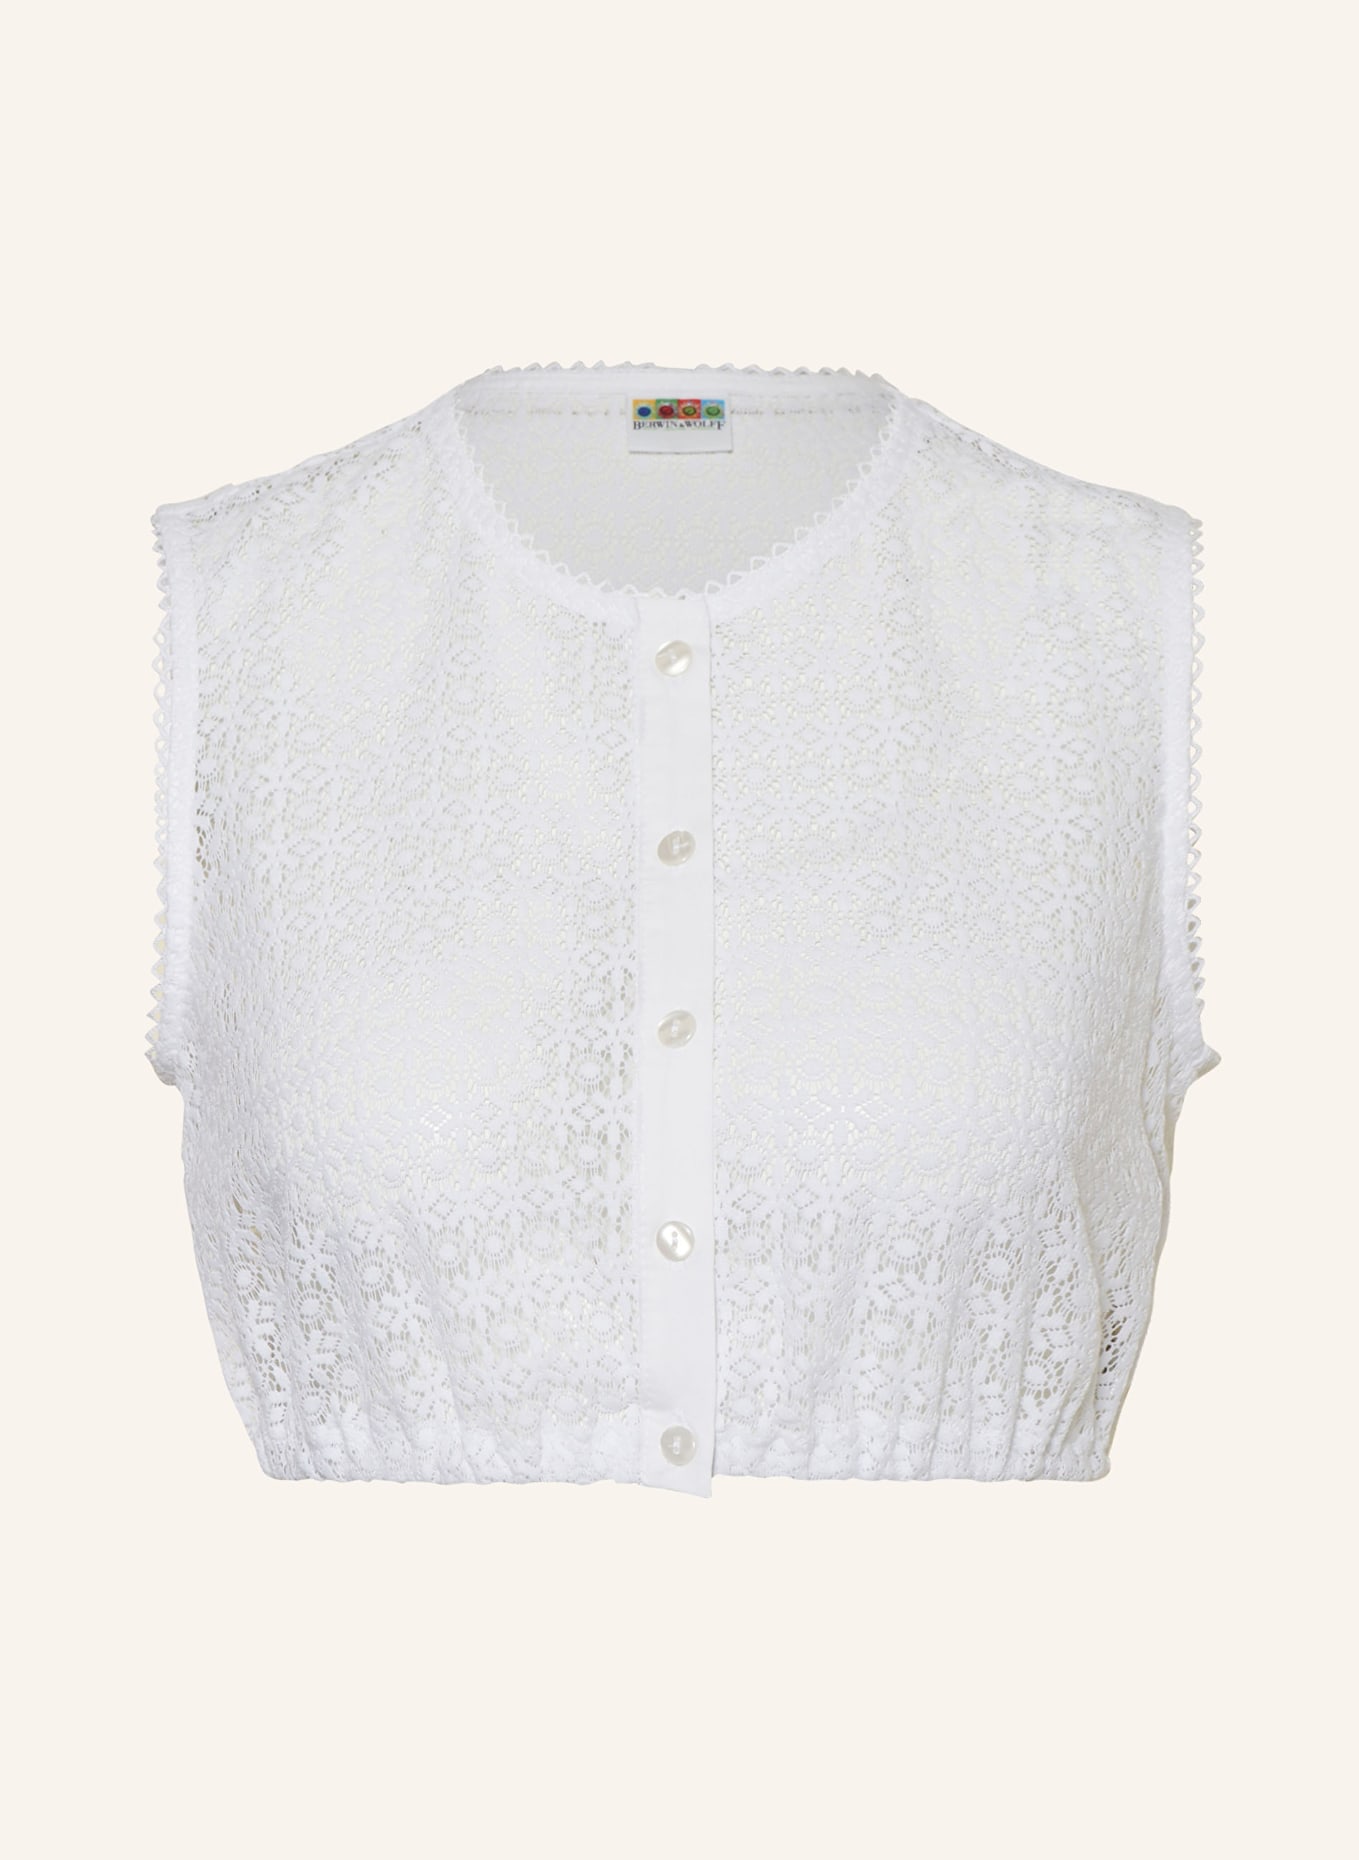 BERWIN & WOLFF Dirndl blouse made of lace, Color: WHITE (Image 1)